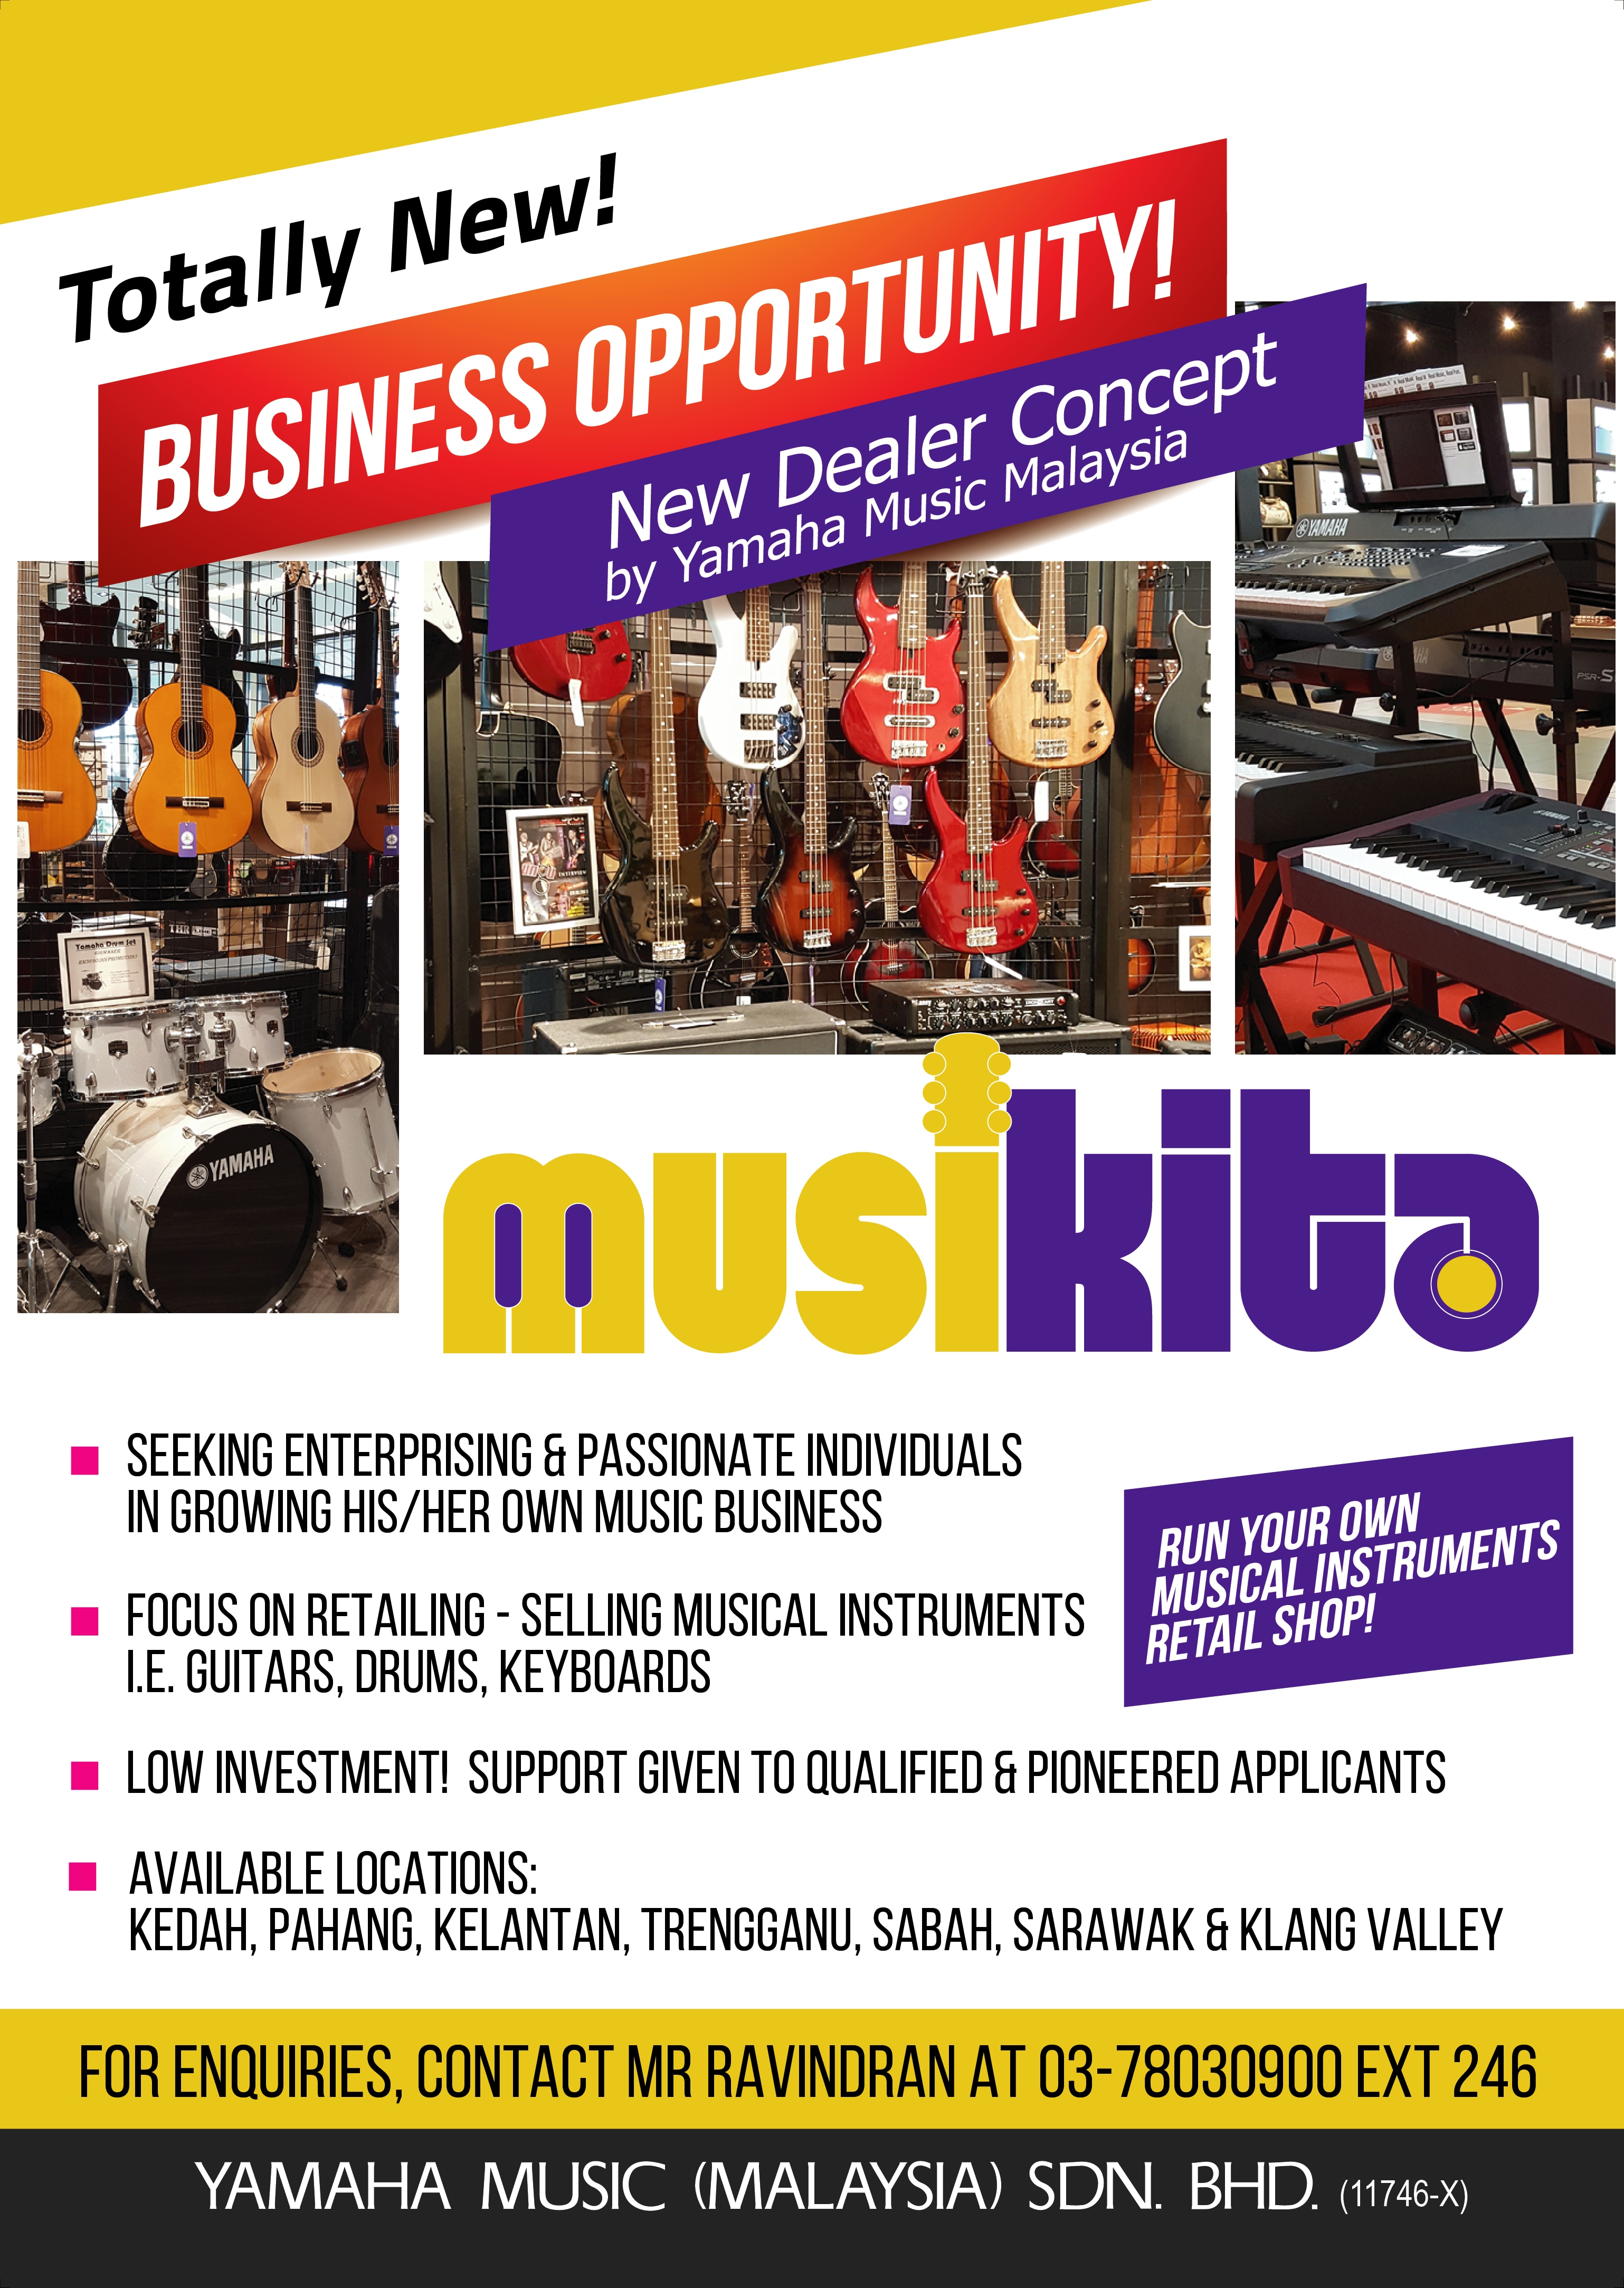 Run your own musical instruments retail shop!